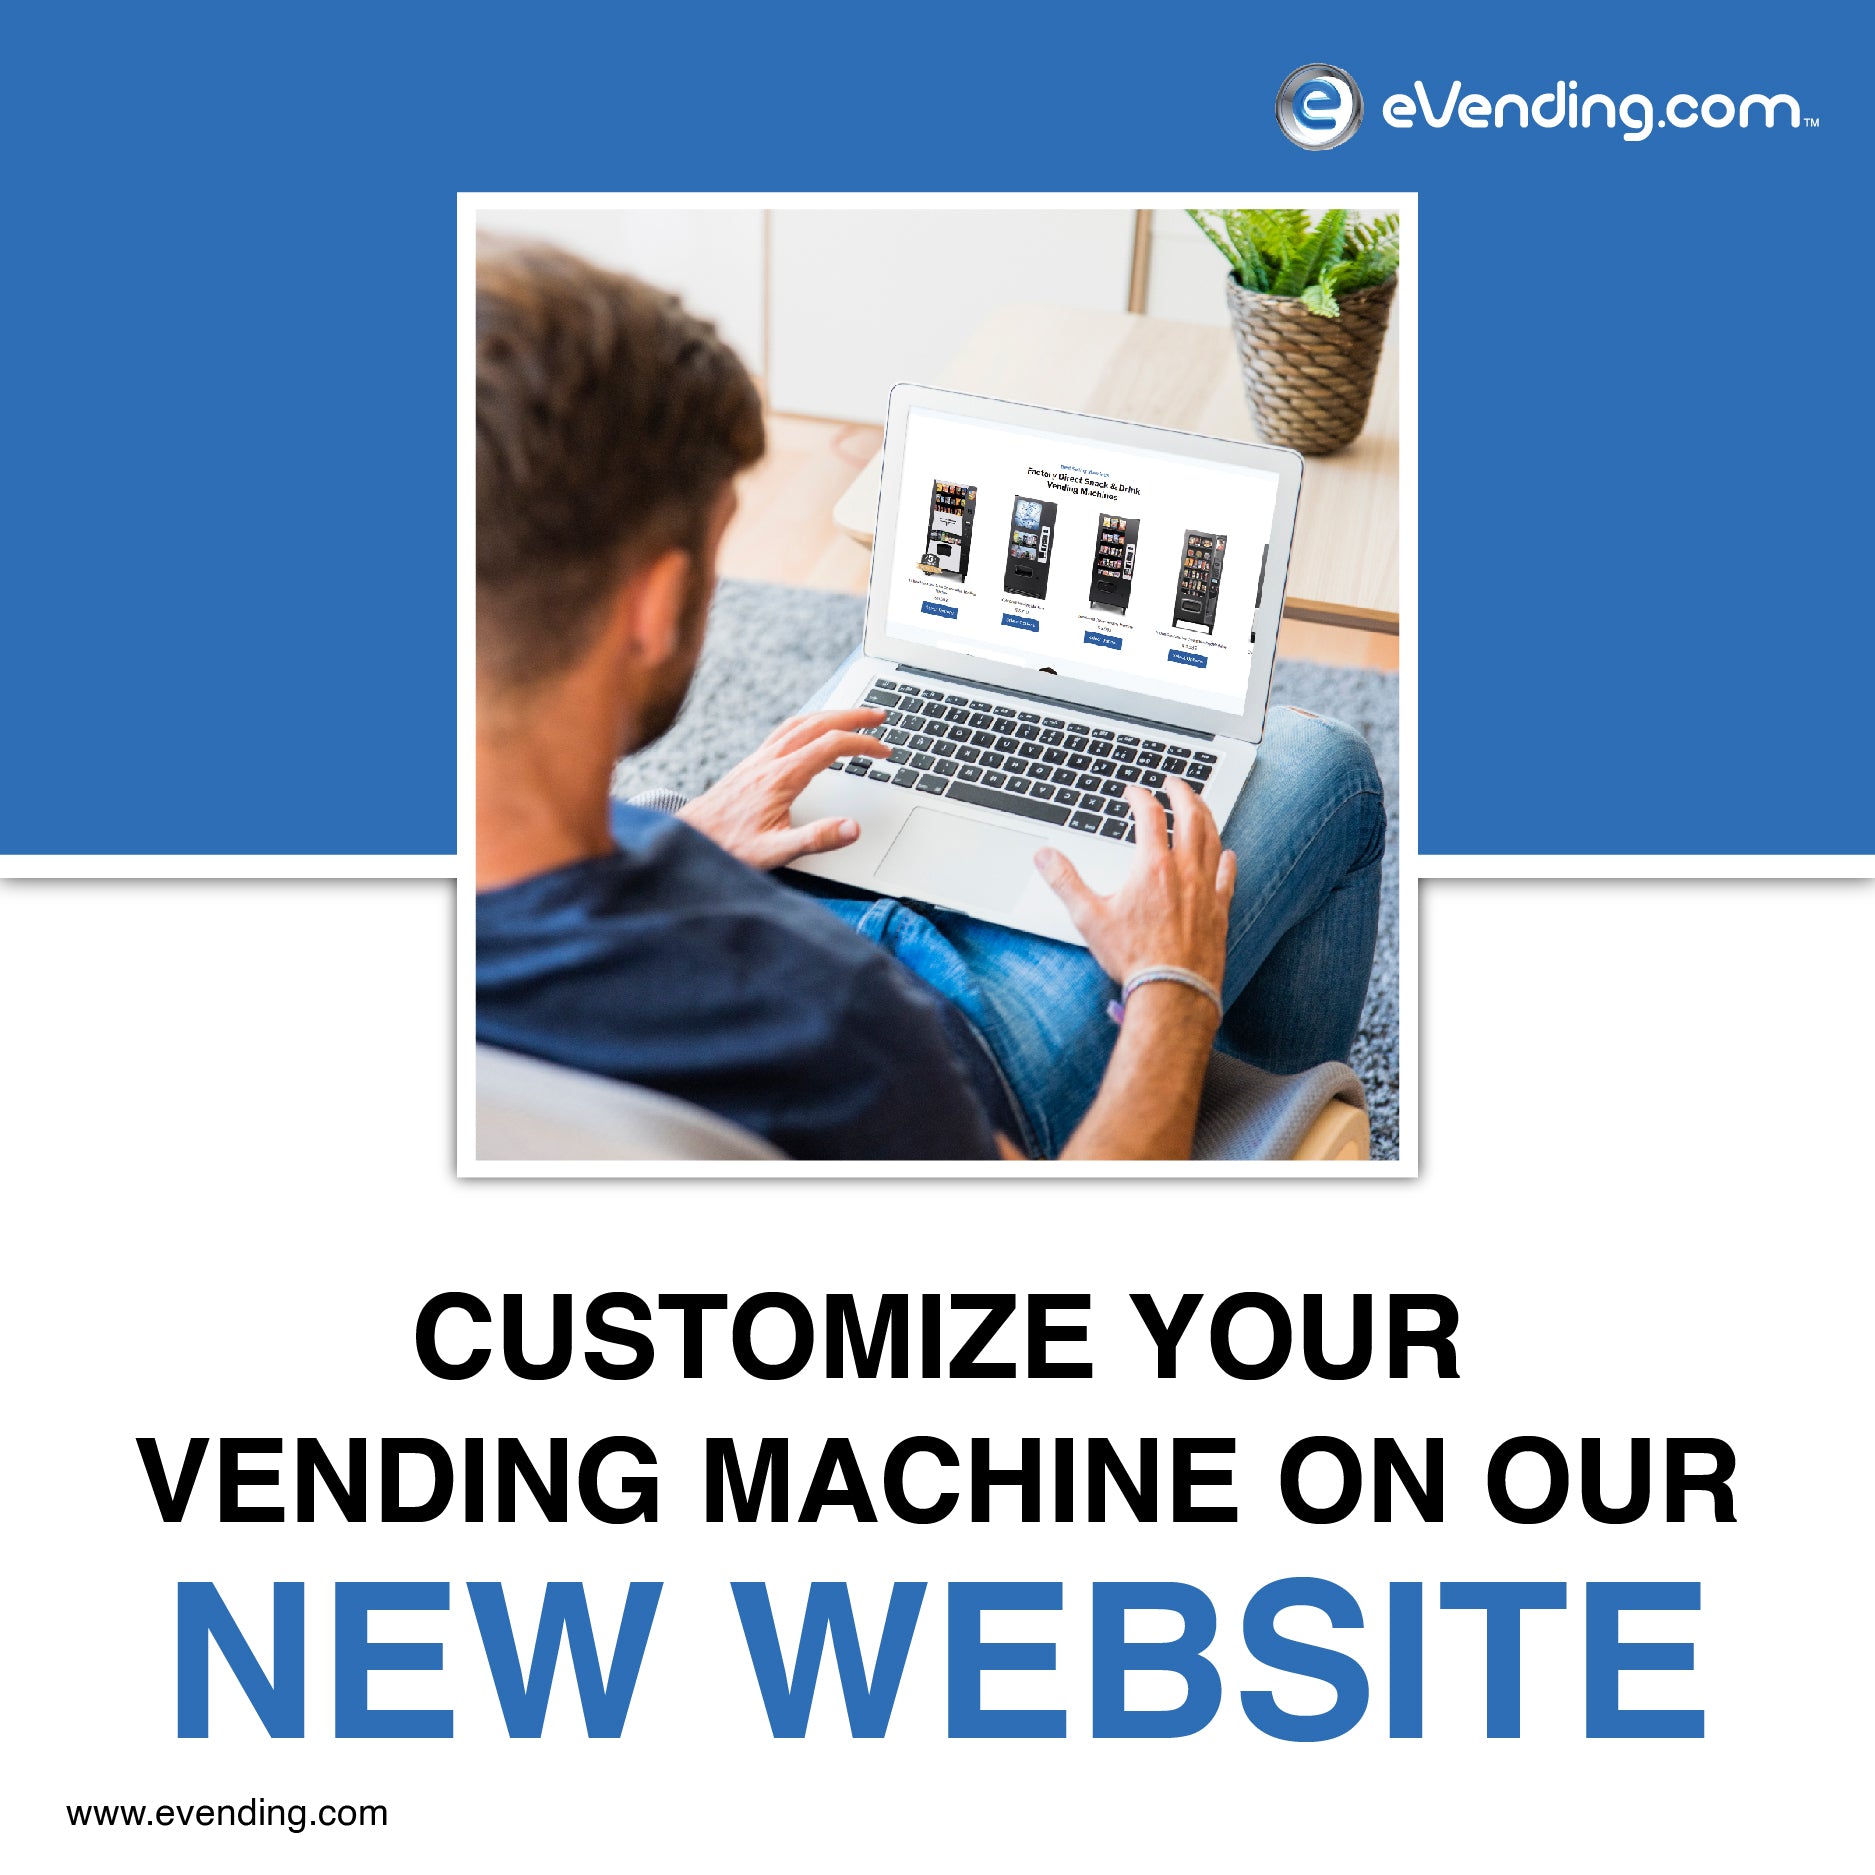 Your Vending Machine, Your Way: Customize Your Vending Machine and Boost Your Business